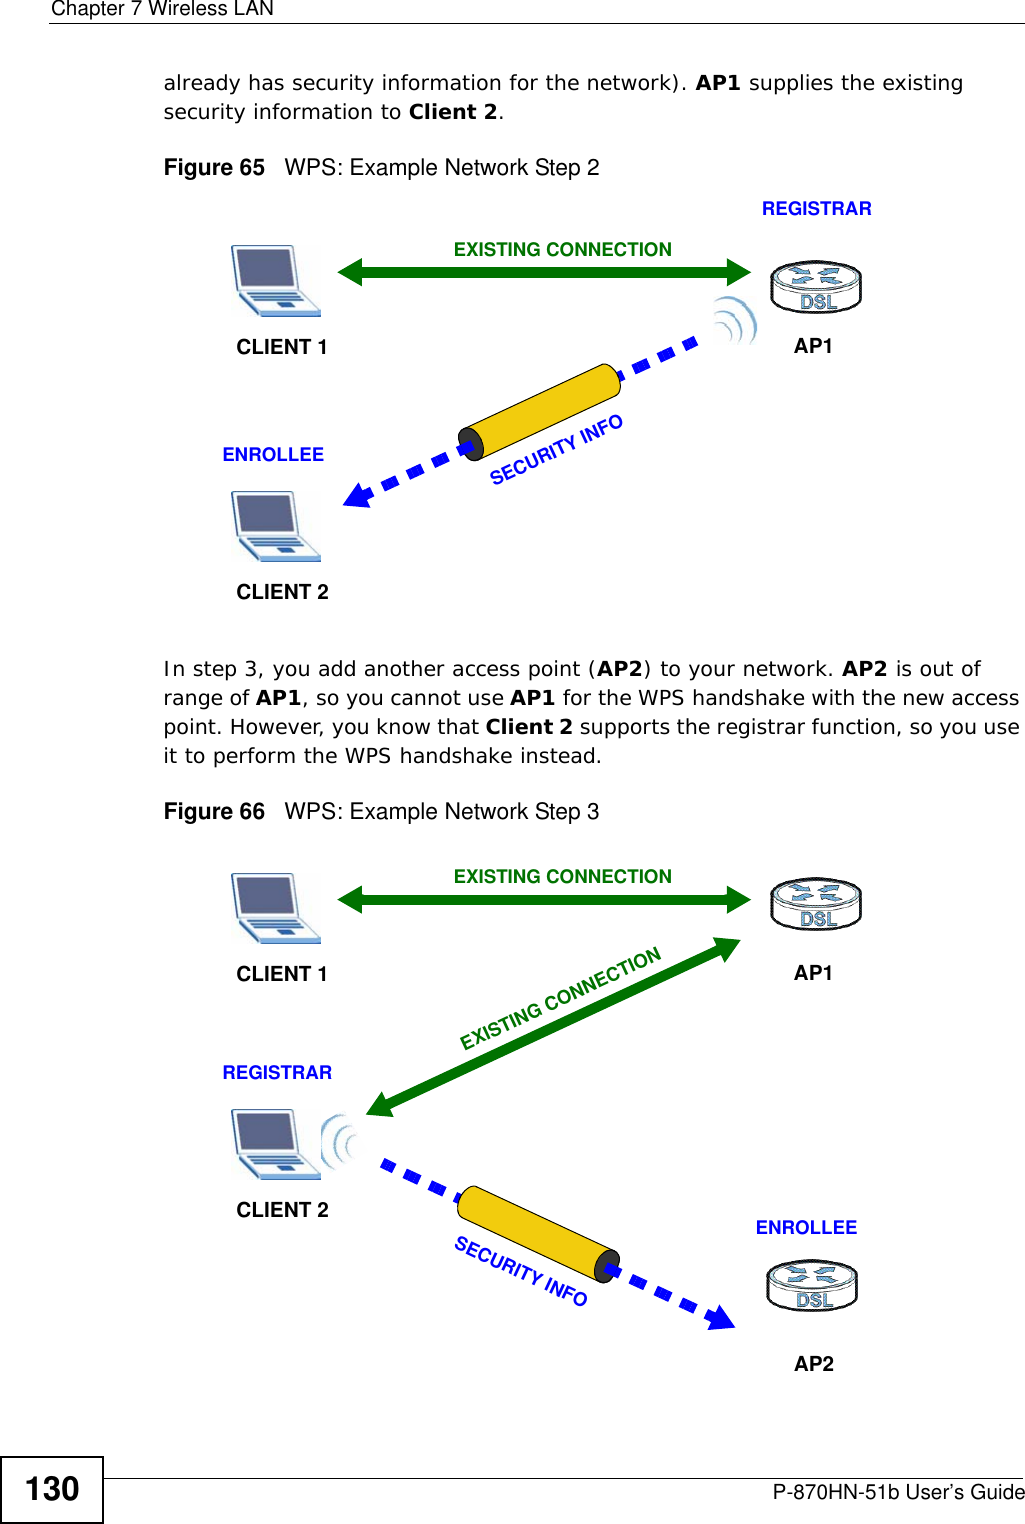 Chapter 7 Wireless LANP-870HN-51b User’s Guide130already has security information for the network). AP1 supplies the existing security information to Client 2.Figure 65   WPS: Example Network Step 2In step 3, you add another access point (AP2) to your network. AP2 is out of range of AP1, so you cannot use AP1 for the WPS handshake with the new access point. However, you know that Client 2 supports the registrar function, so you use it to perform the WPS handshake instead.Figure 66   WPS: Example Network Step 3REGISTRARCLIENT 1 AP1ENROLLEECLIENT 2EXISTING CONNECTIONSECURITY INFOCLIENT 1 AP1REGISTRARCLIENT 2EXISTING CONNECTIONSECURITY INFOENROLLEEAP2EXISTING CONNECTION